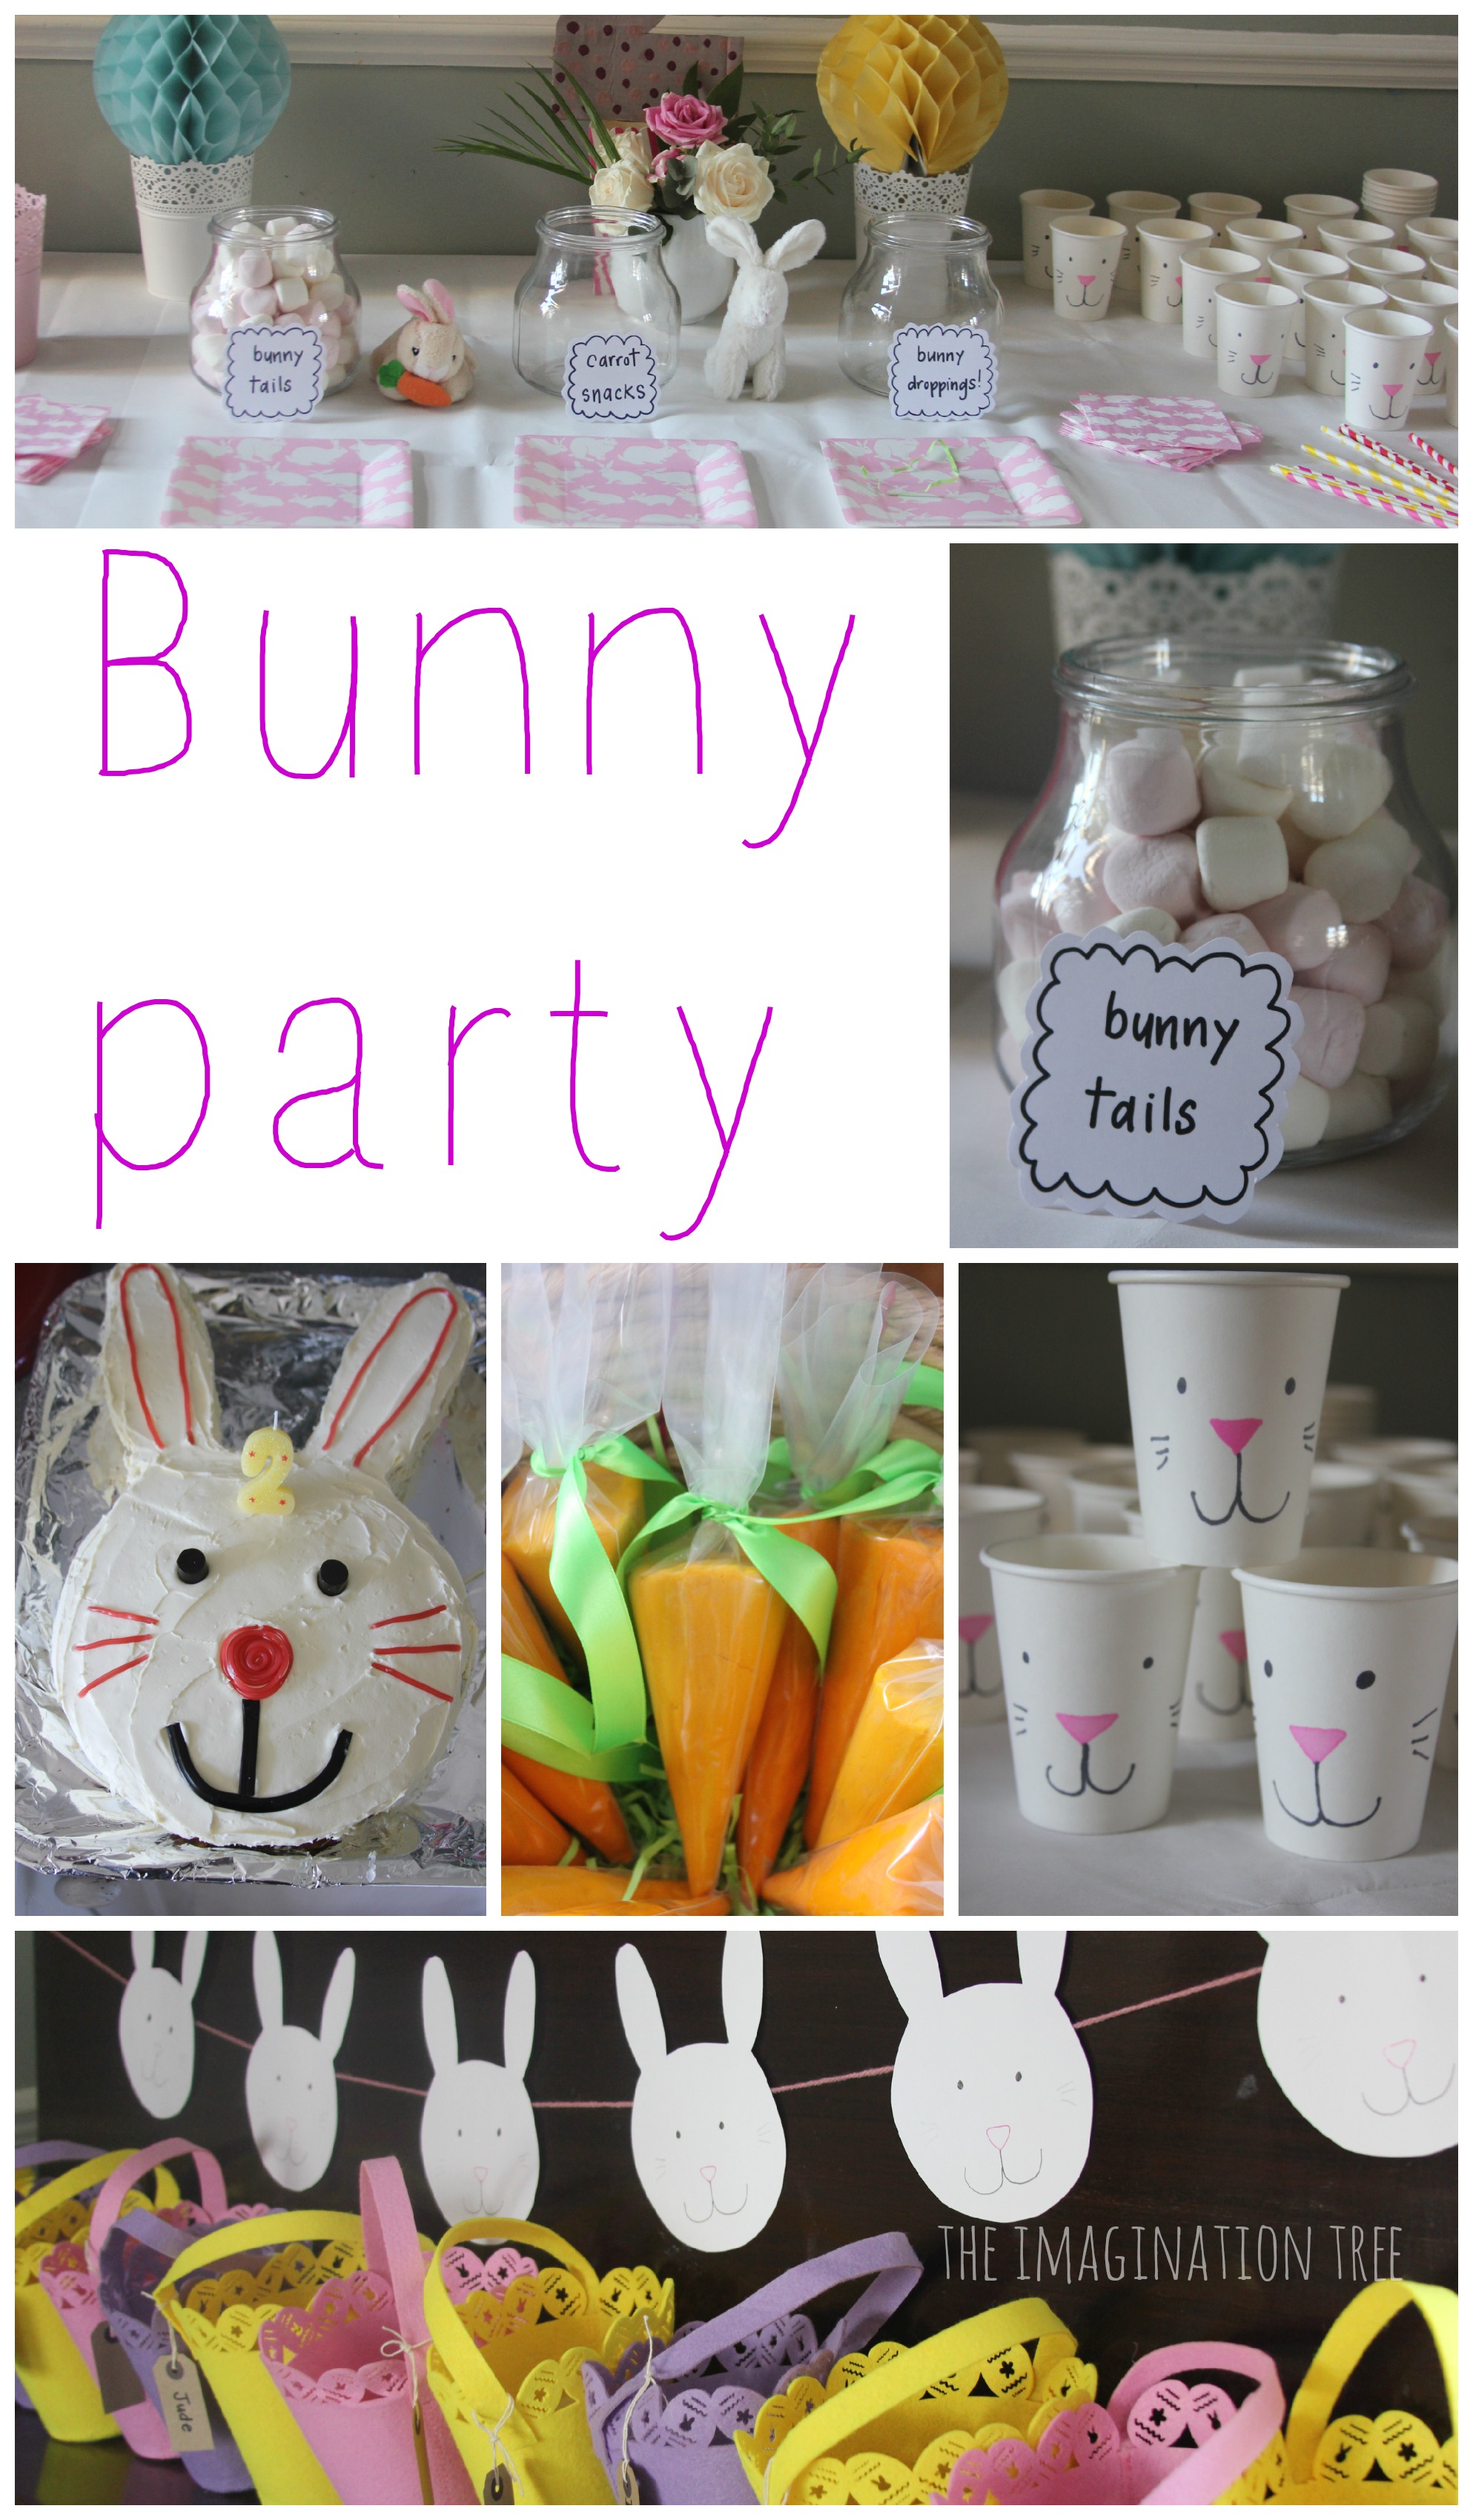 26 PCS Bunny Birthday Party Decorations Kit Easter Bunny Party Supplies Bunny Birthday Banner Bunny Honeycomb Centerpiece Rabbit Hanging Swirls Cutouts for Girl Baby Shower Party Supplies 